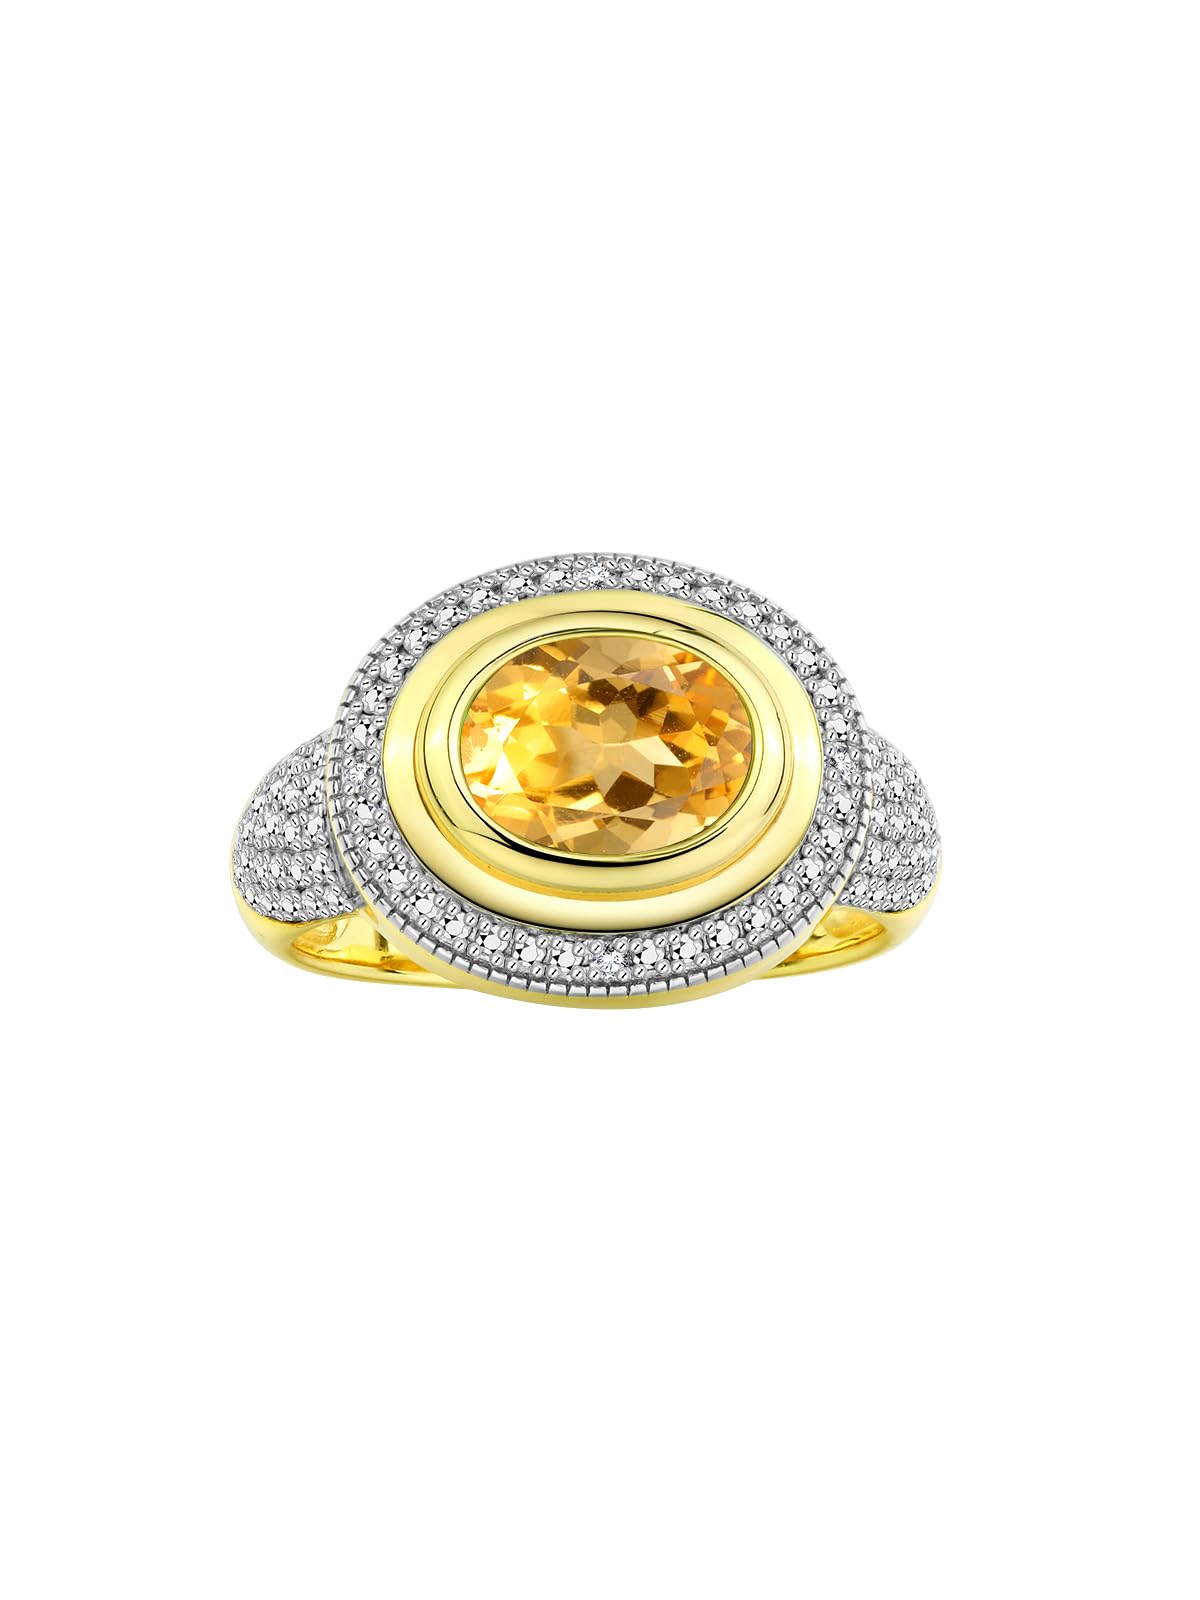 Rylos Classic Ring with 9X7MM Oval Gemstone & Diamonds – Radiant Color Stone Jewelry for Women in Yellow Gold Plated Silver – Available in Sizes 5-13